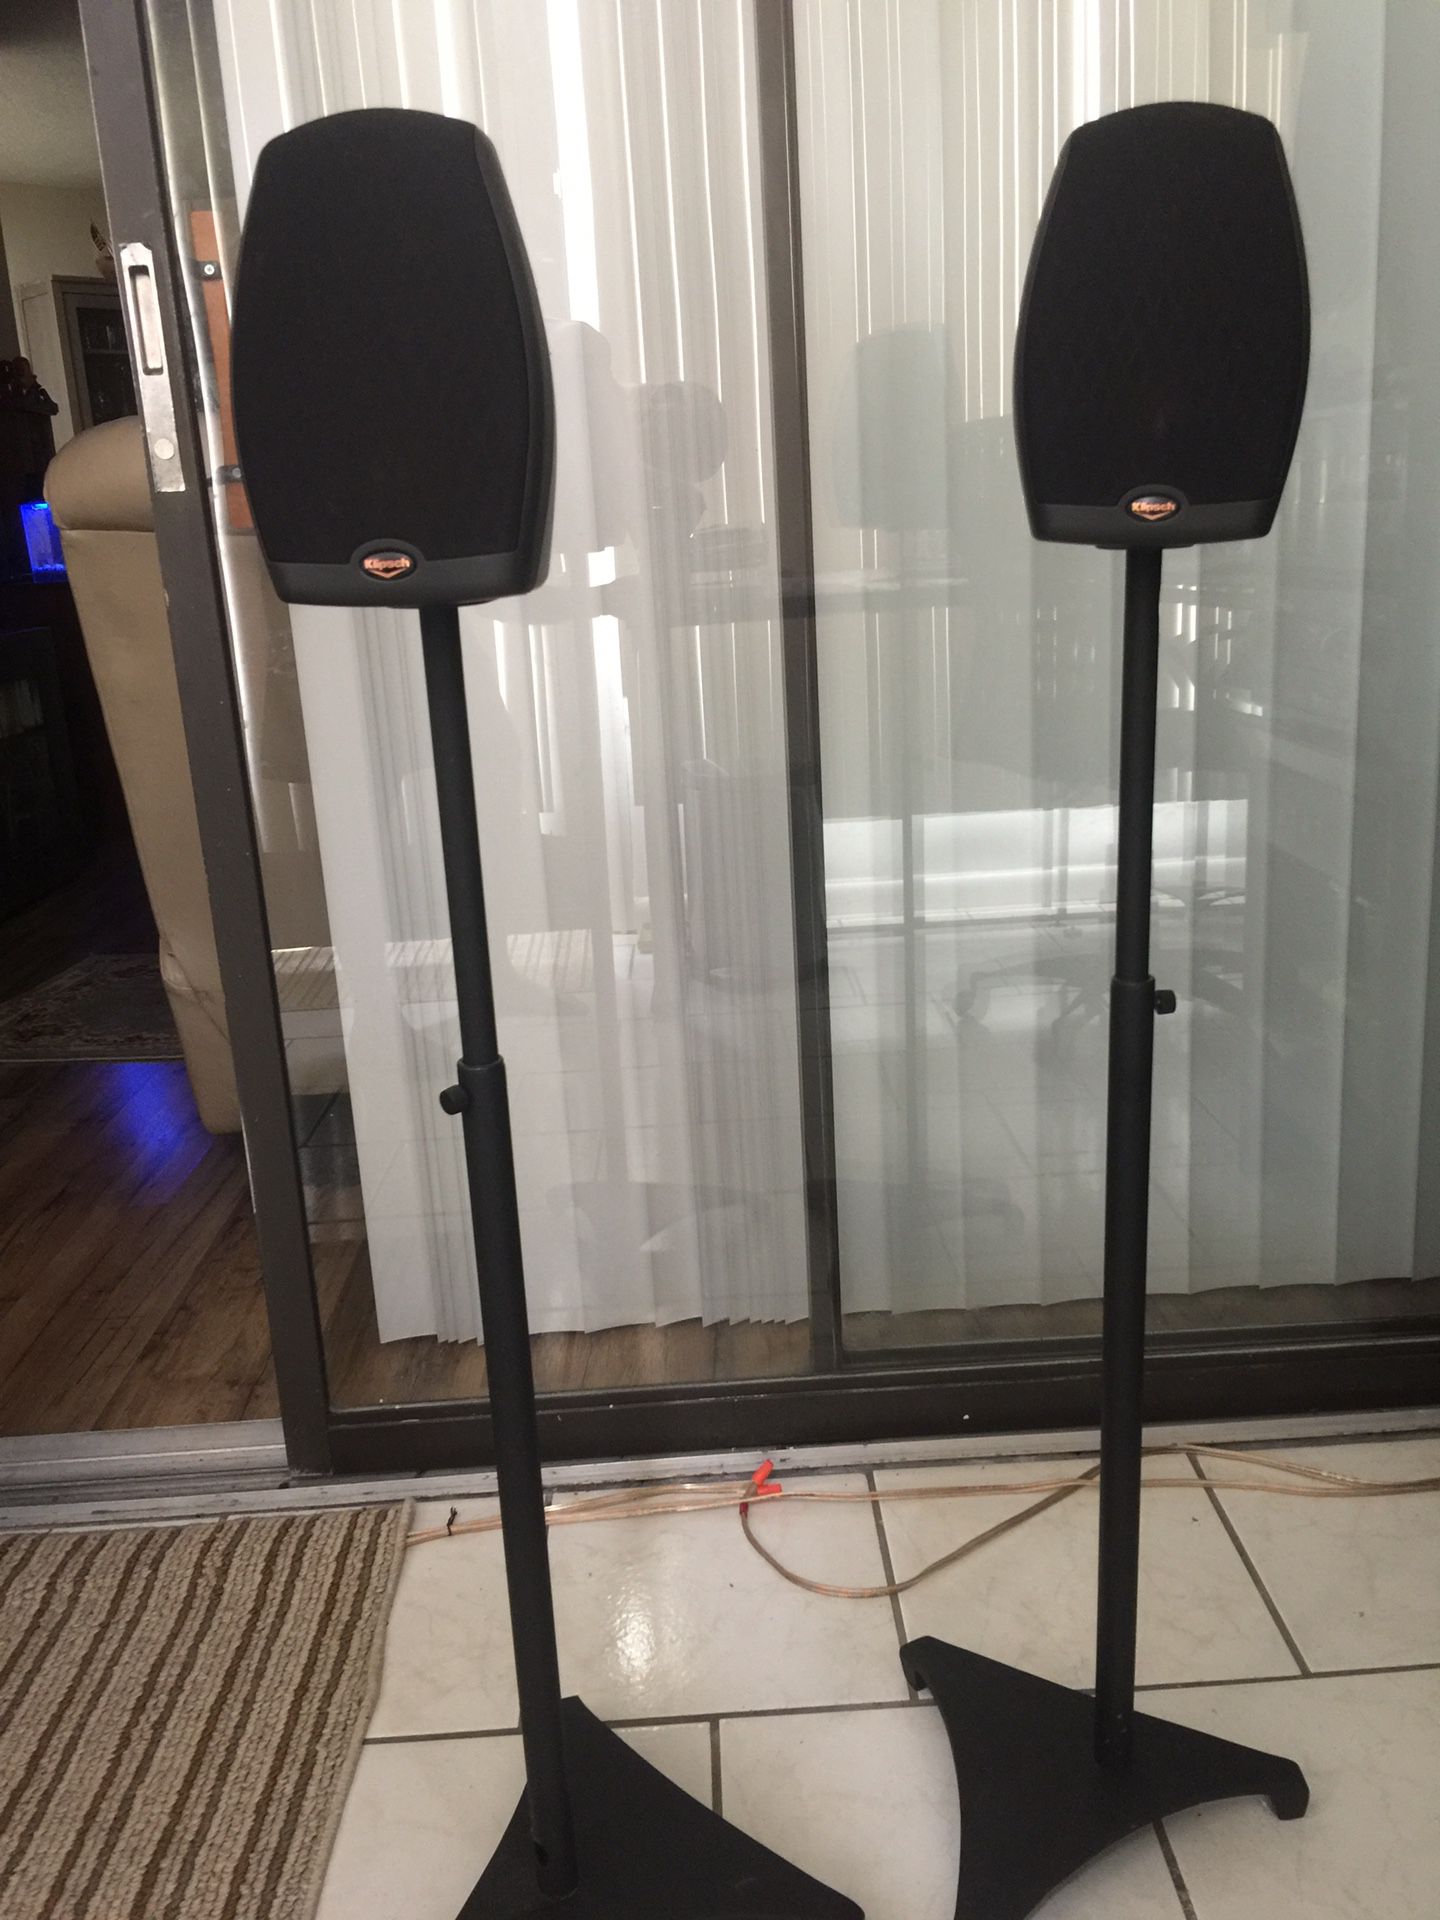 Theater klipsch speakers. Pair with Stand base.